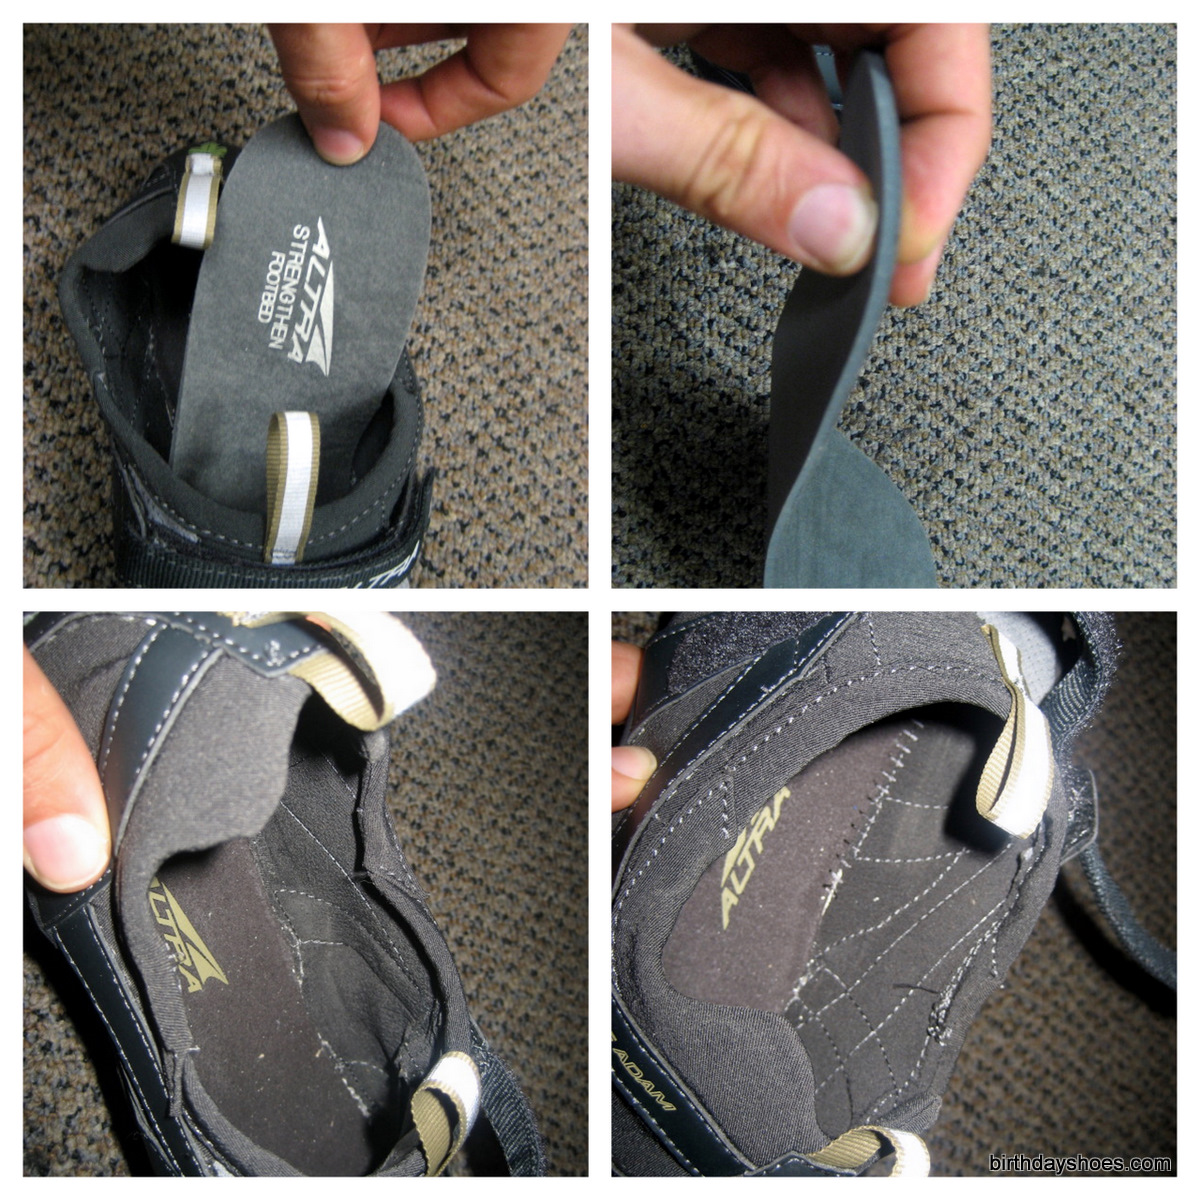 The Altra Adam has a removable insole that allows you to adjust the ground feel to your preferences.